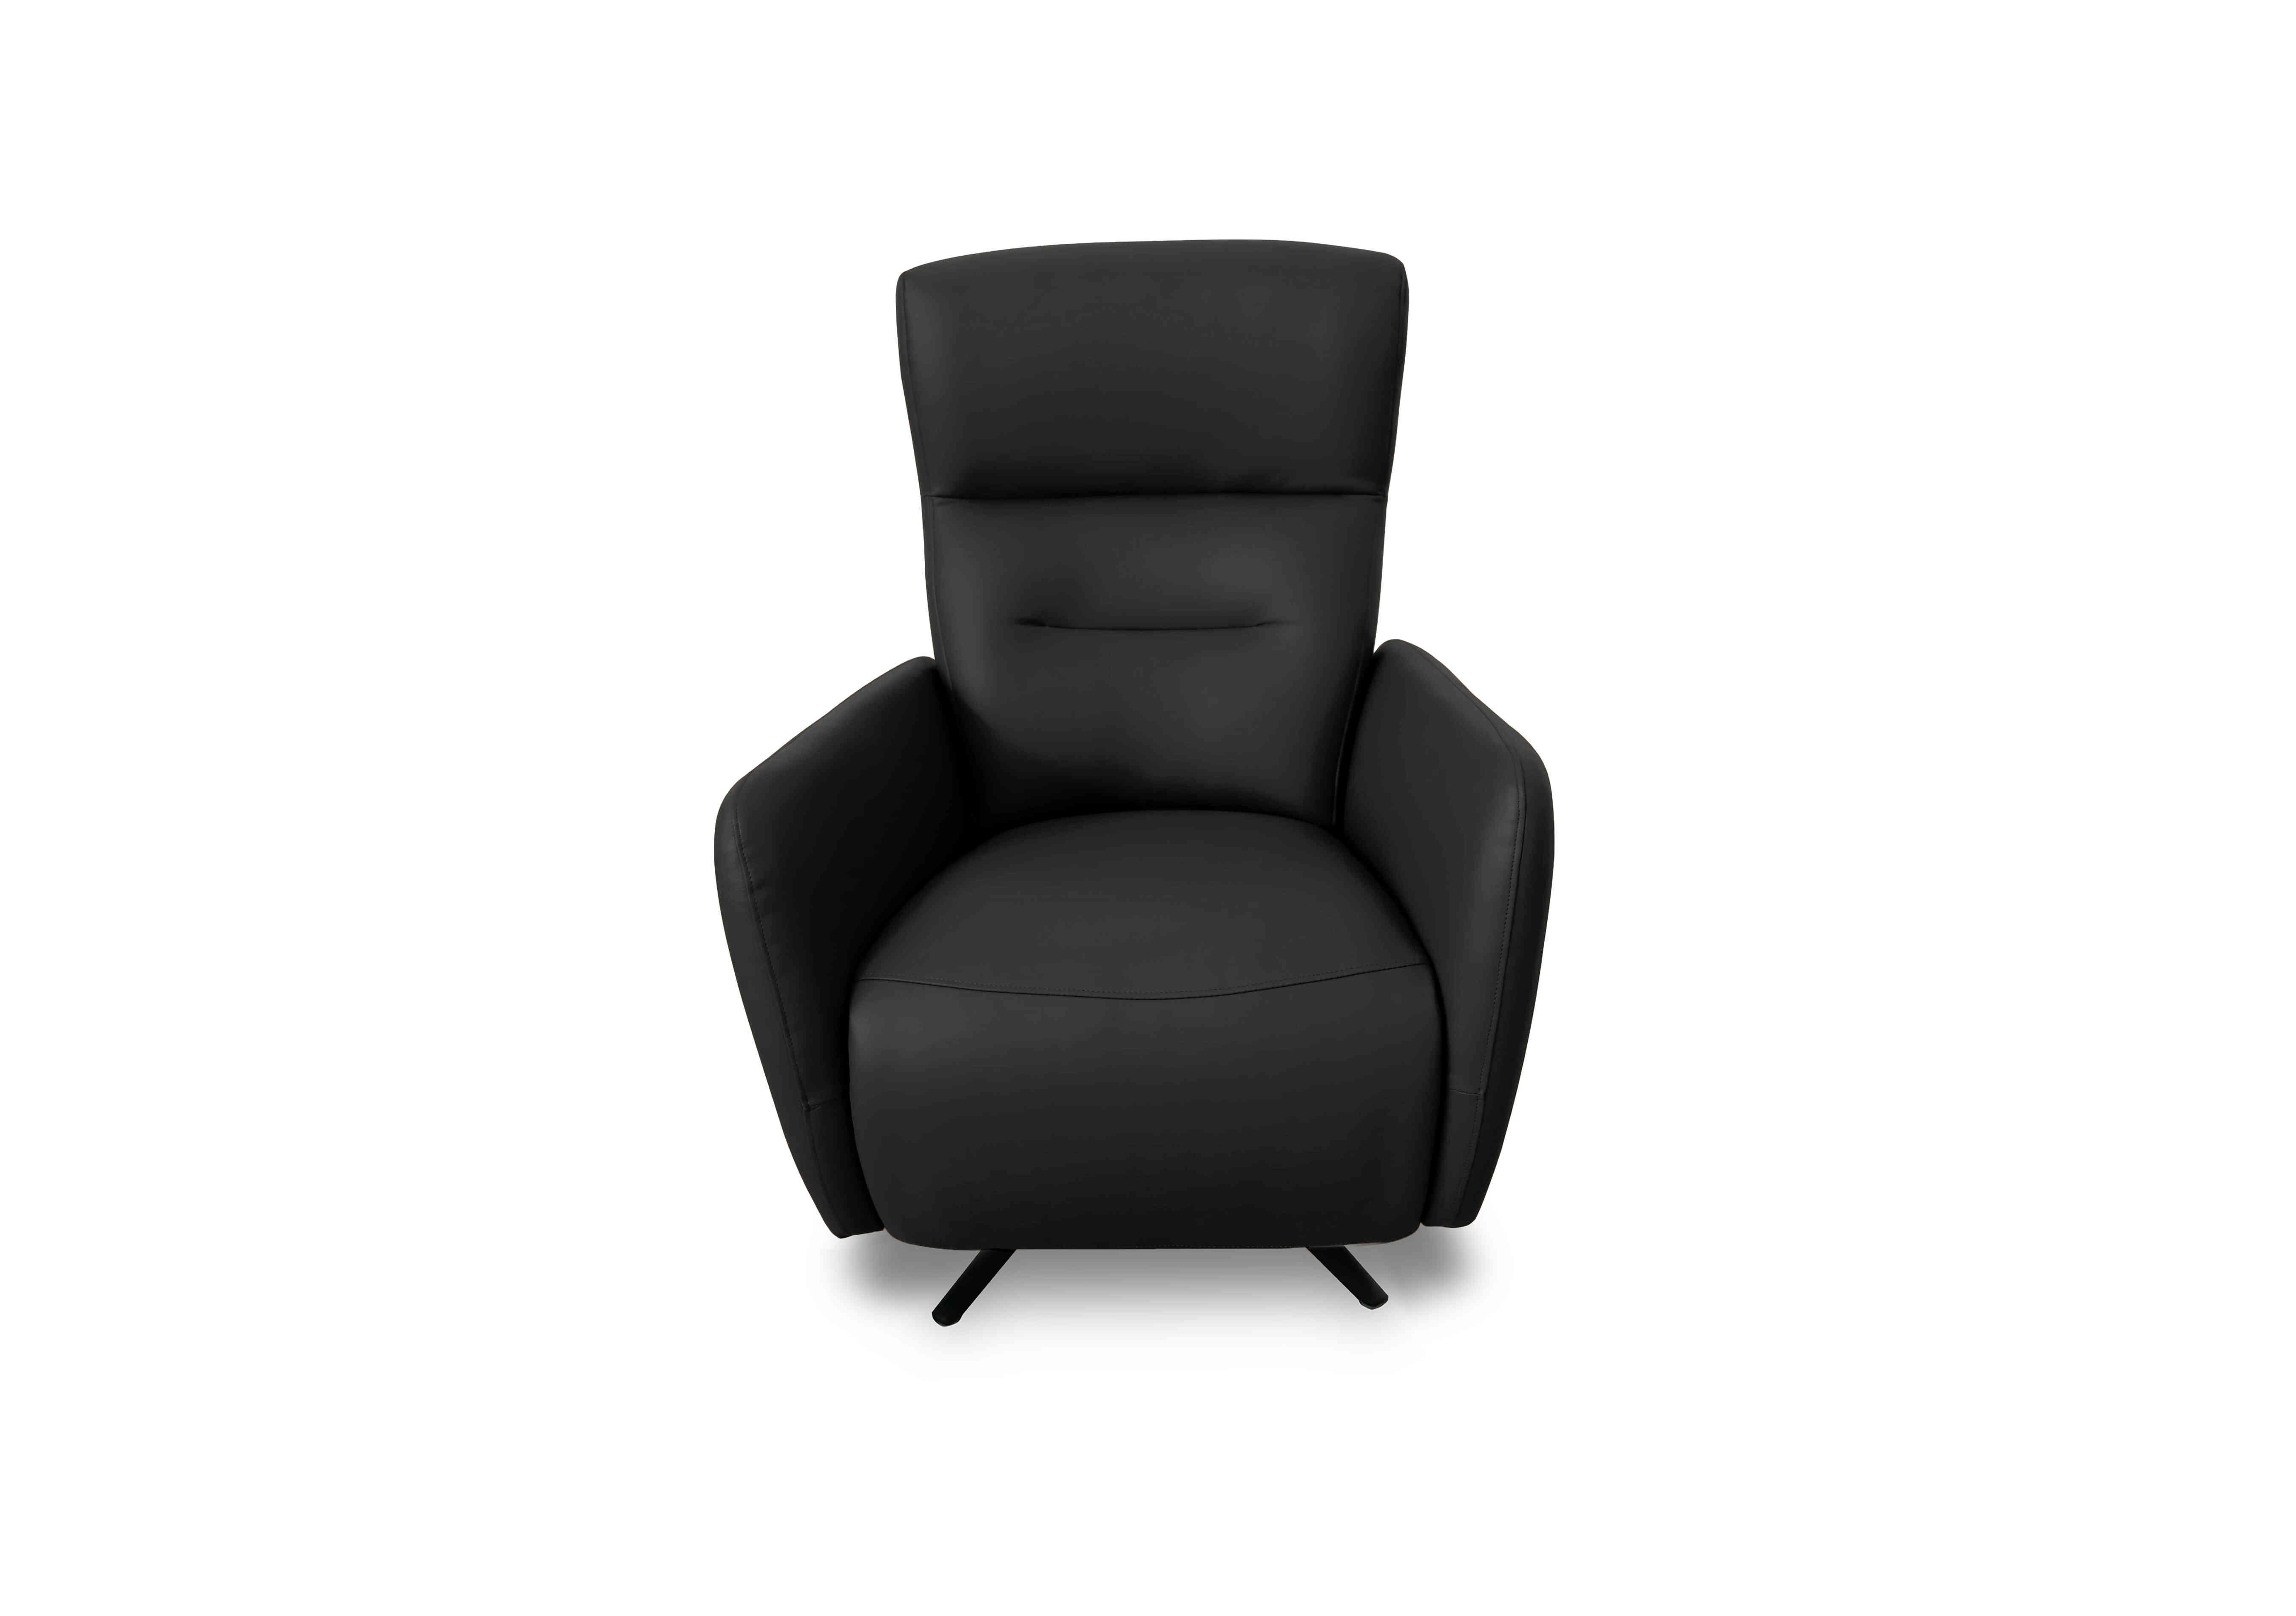 Designer Chair Collection Le Mans Leather Dual Power Recliner Swivel Chair in Nc-023c Black on Furniture Village